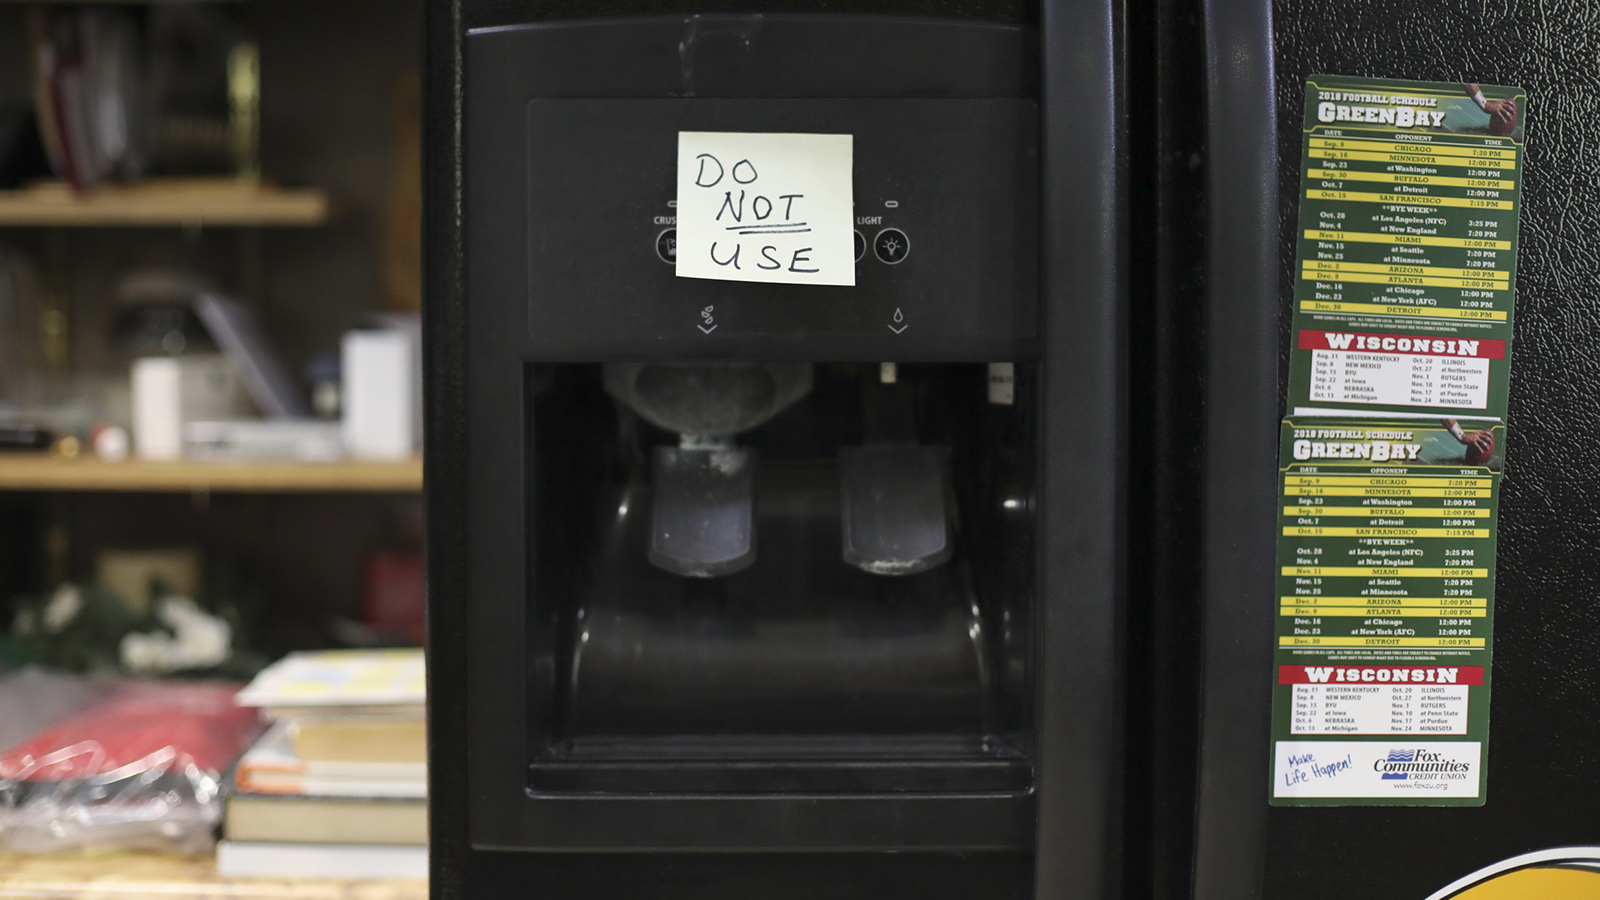 Post-It Note reading "Do Not Use" on refrigerator water dispenser